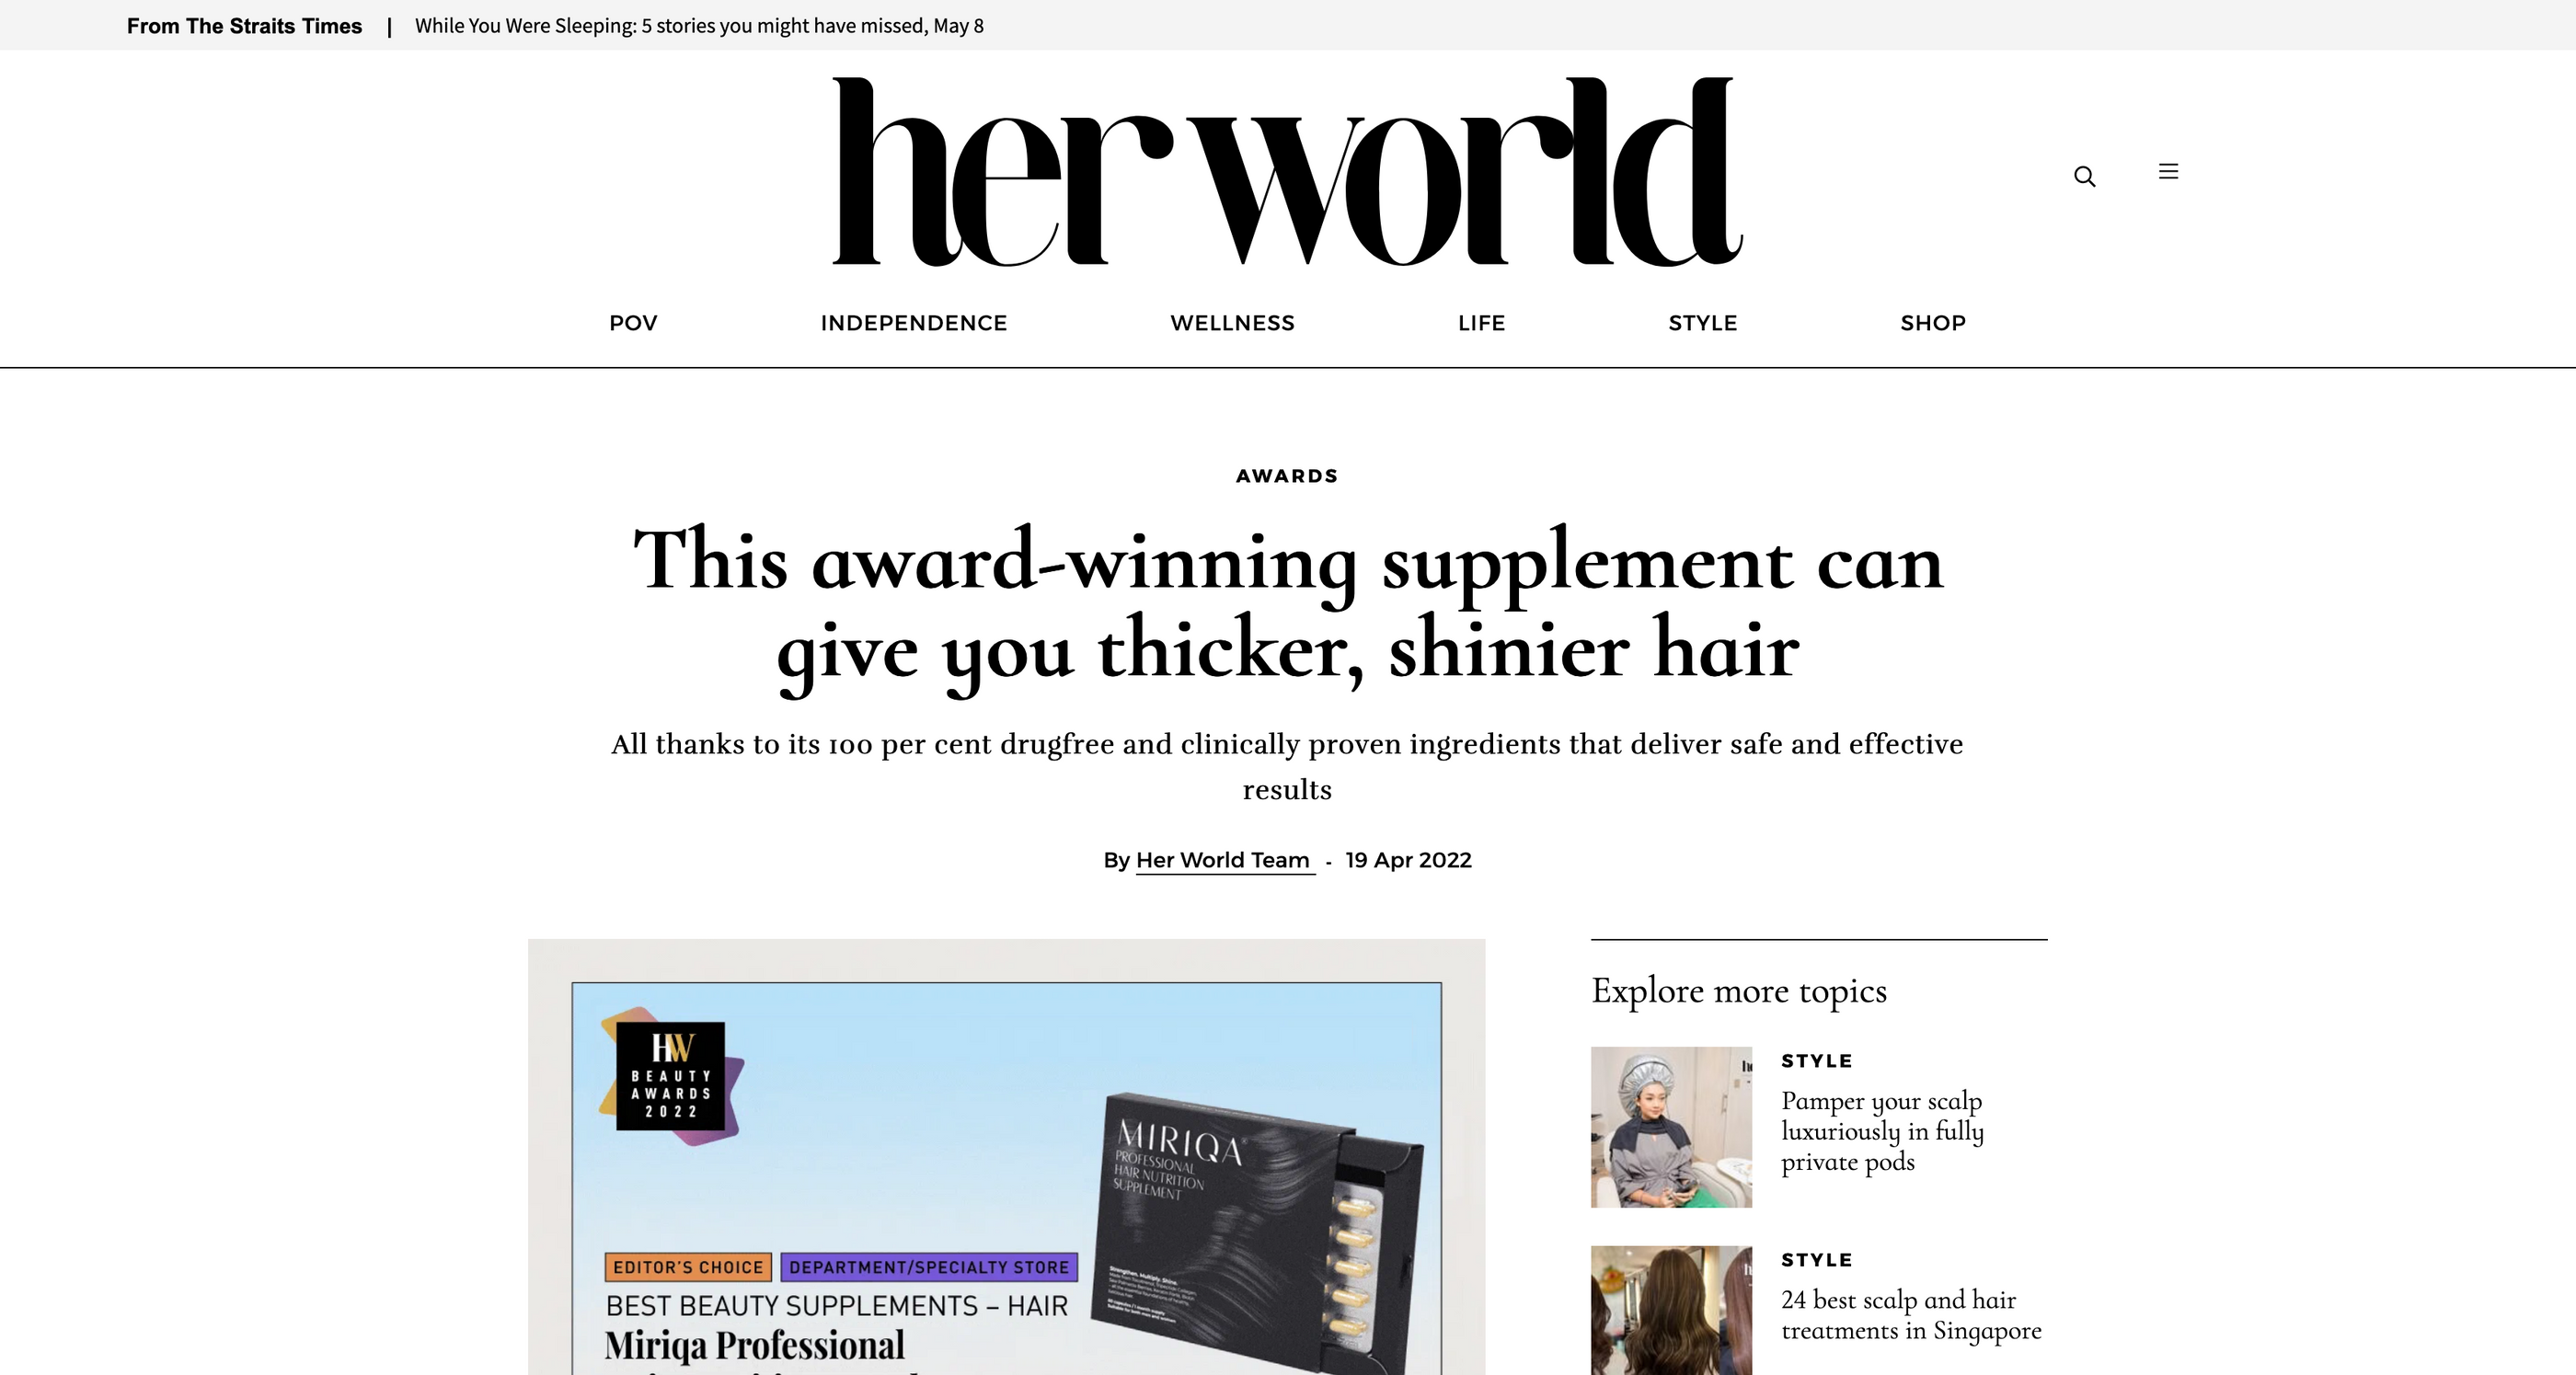 This Award-Winning Supplement Can Give You Thicker, Shinier Hair